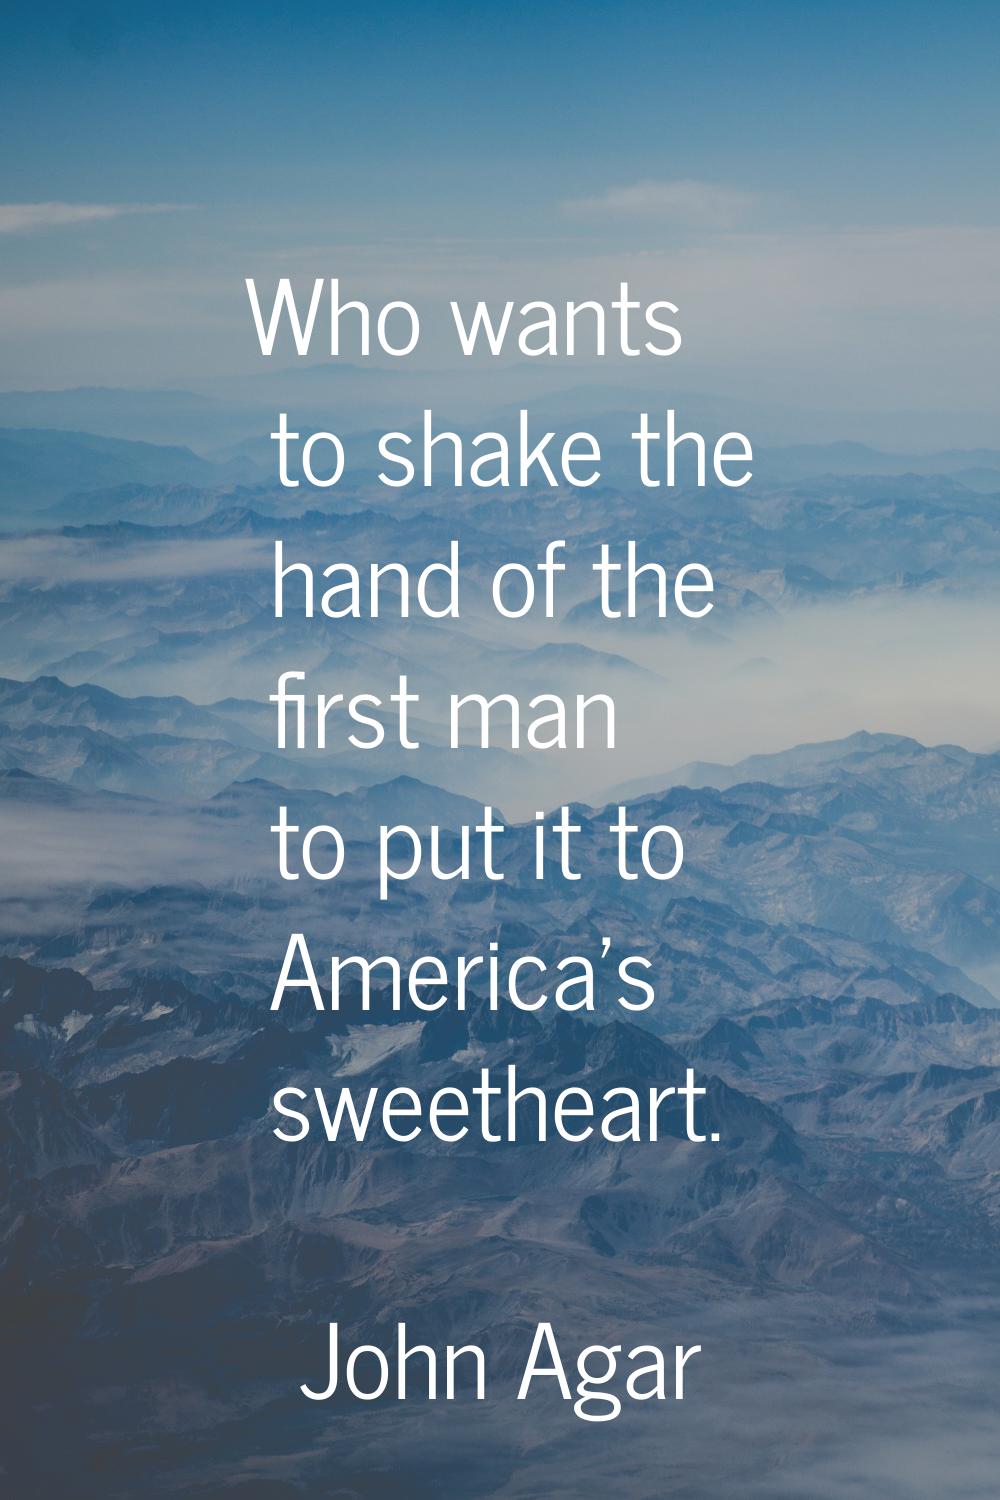 Who wants to shake the hand of the first man to put it to America's sweetheart.